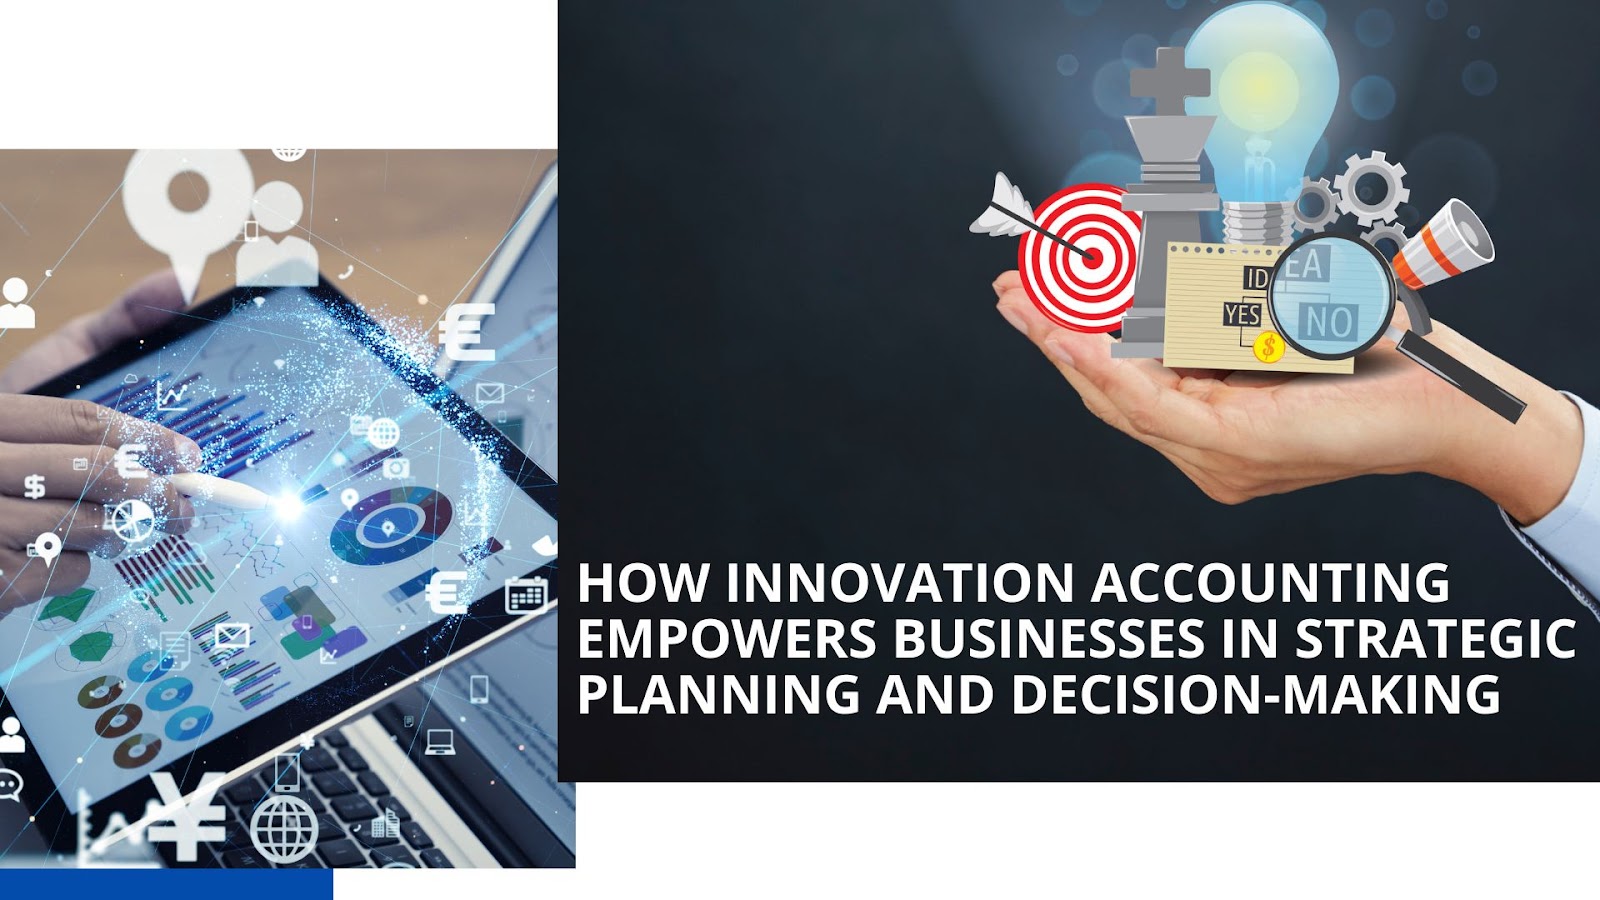 How Innovation Accounting Empowers Businesses in Strategic Planning and Decision-Making